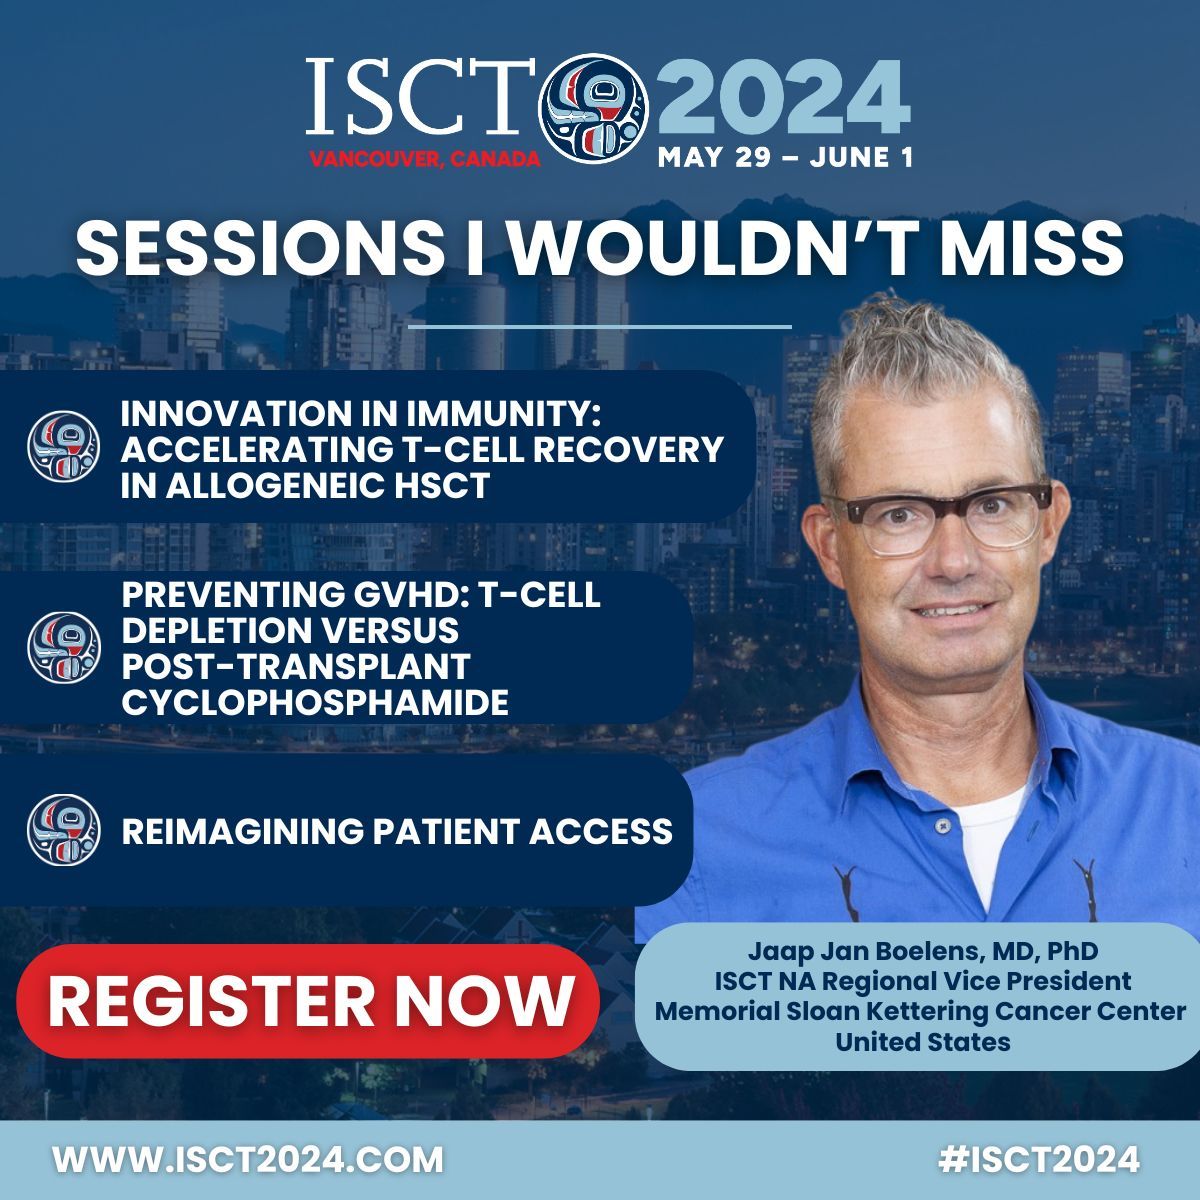 Don't miss out on these hot topic sessions at ISCT 2024, selected by ISCT North America Vice President, Jaap Jan Boelens. Register now: buff.ly/484XMFT